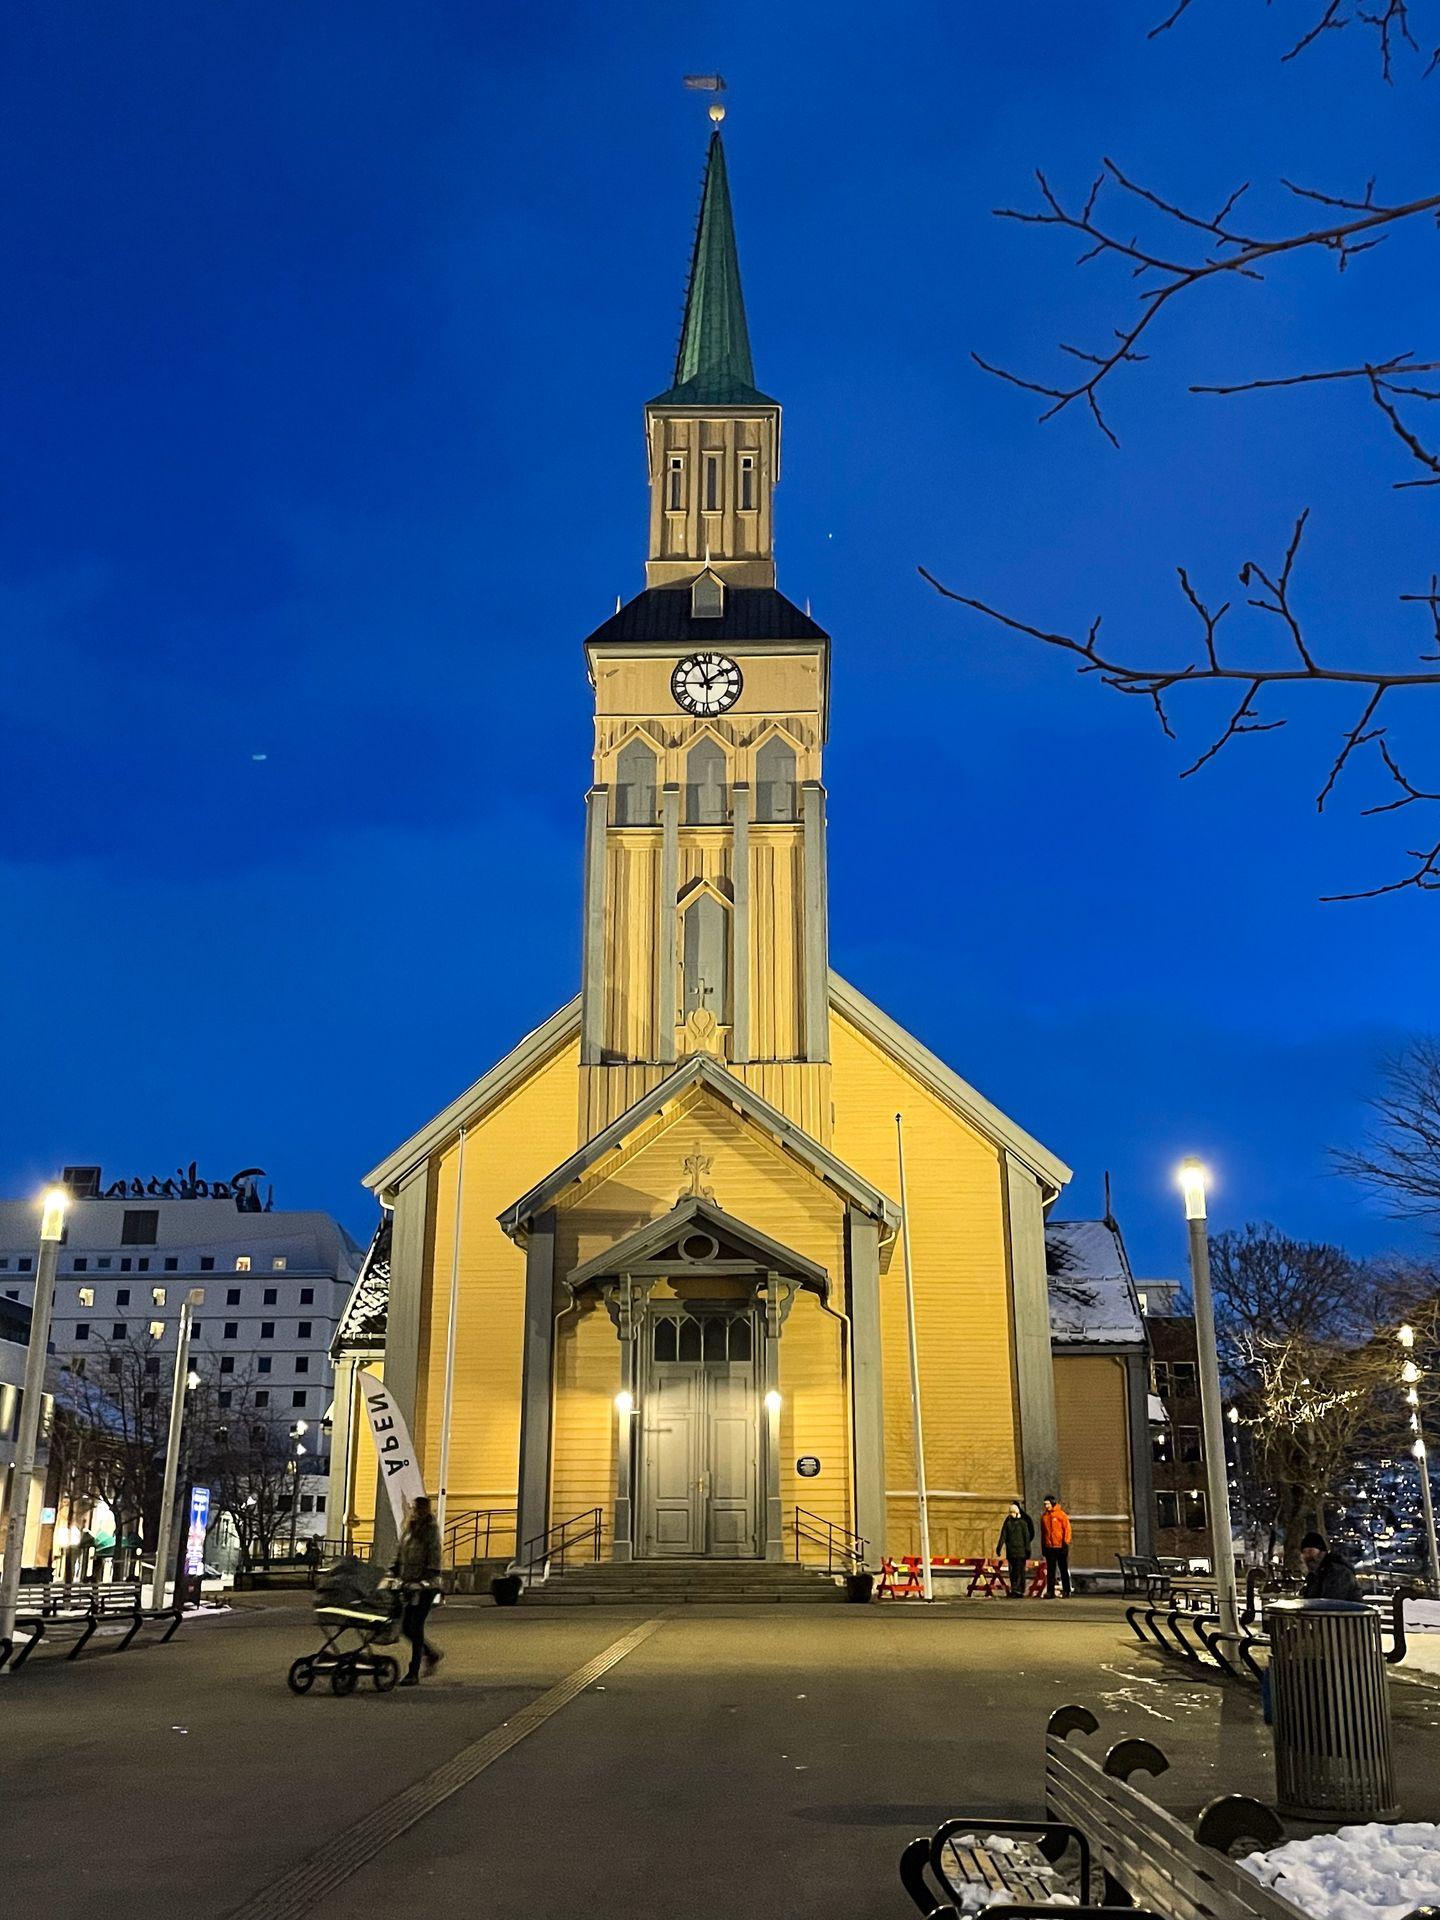 The exterior of the Tromso Cathedral, a yellow building with a tall tower